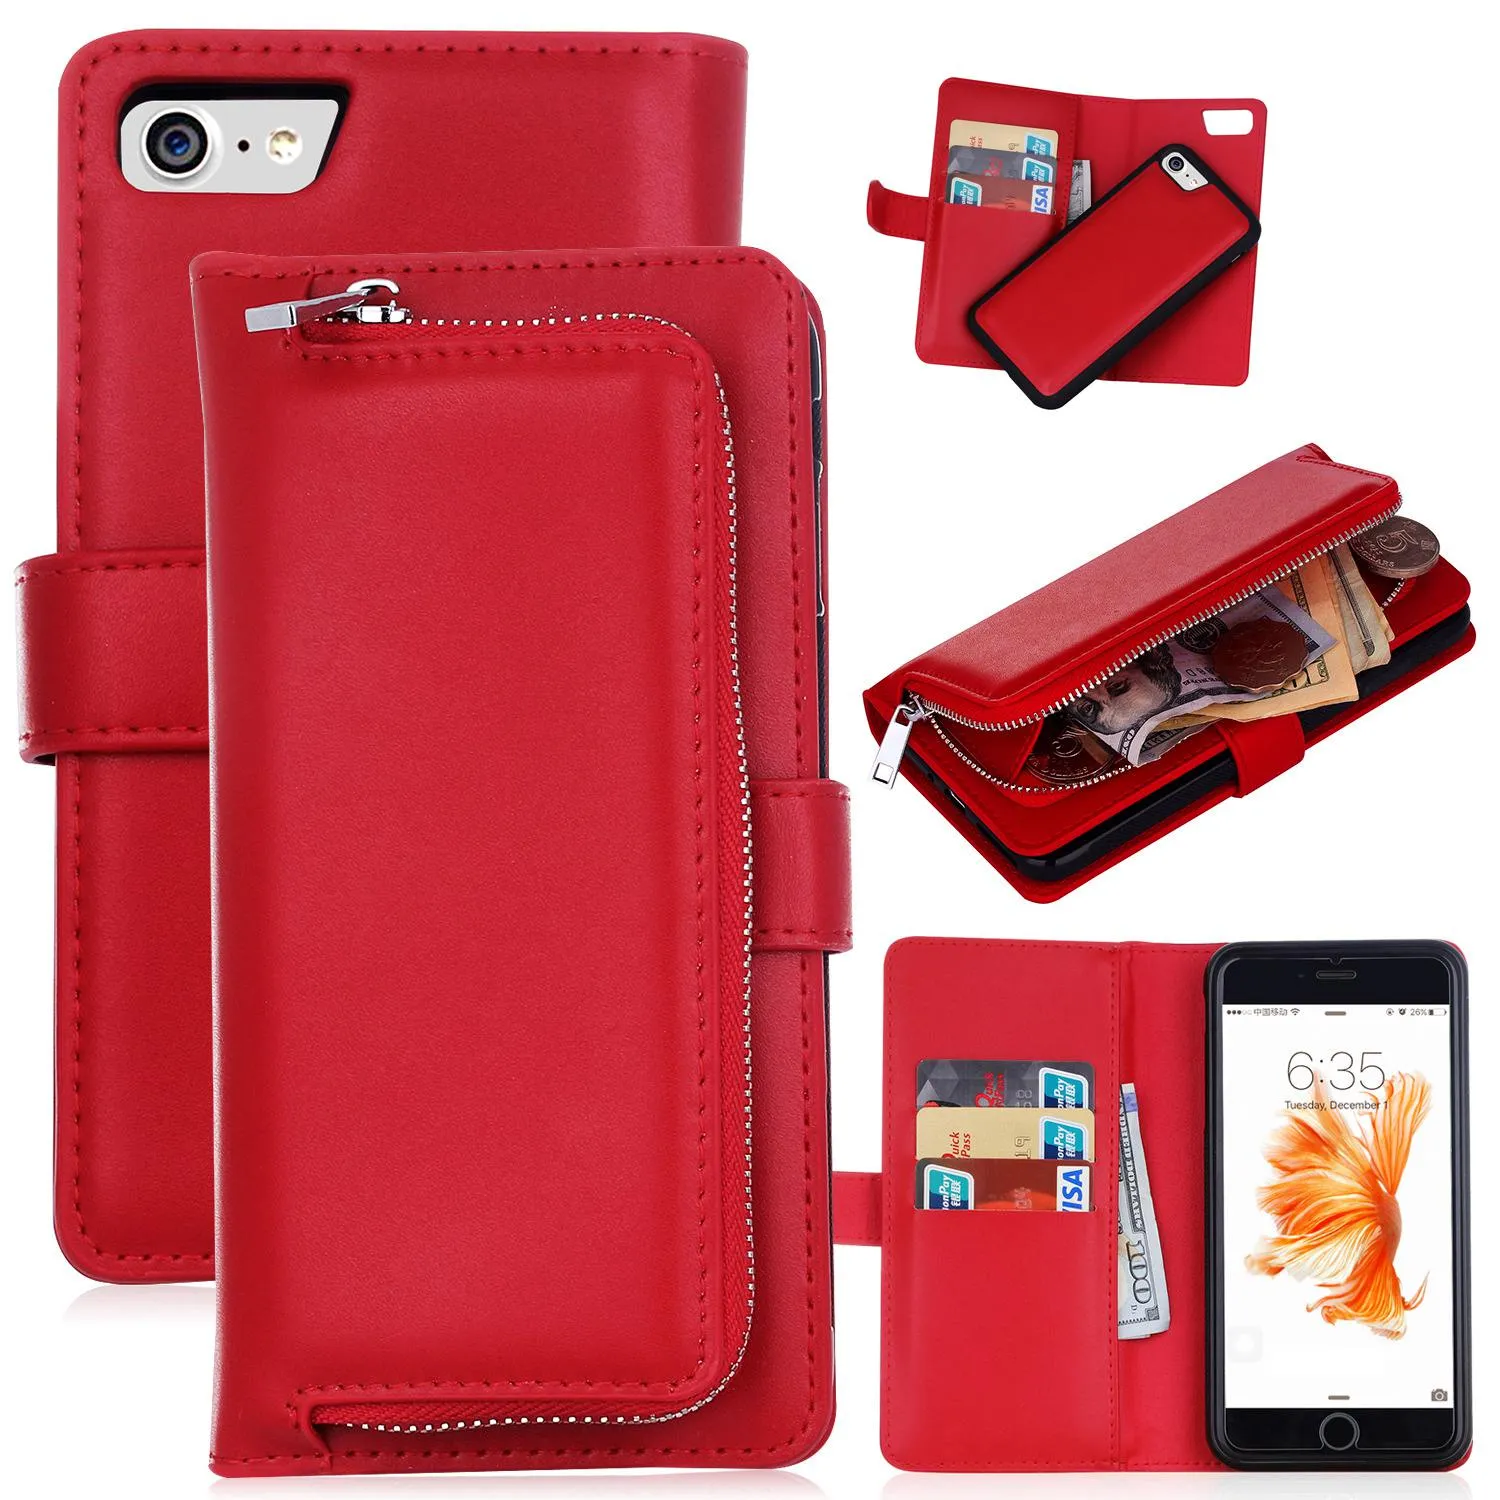 2 in 1 Magnet Detachable Removable Zipper Leather Wallet Cases Cover for iphone 7 8 